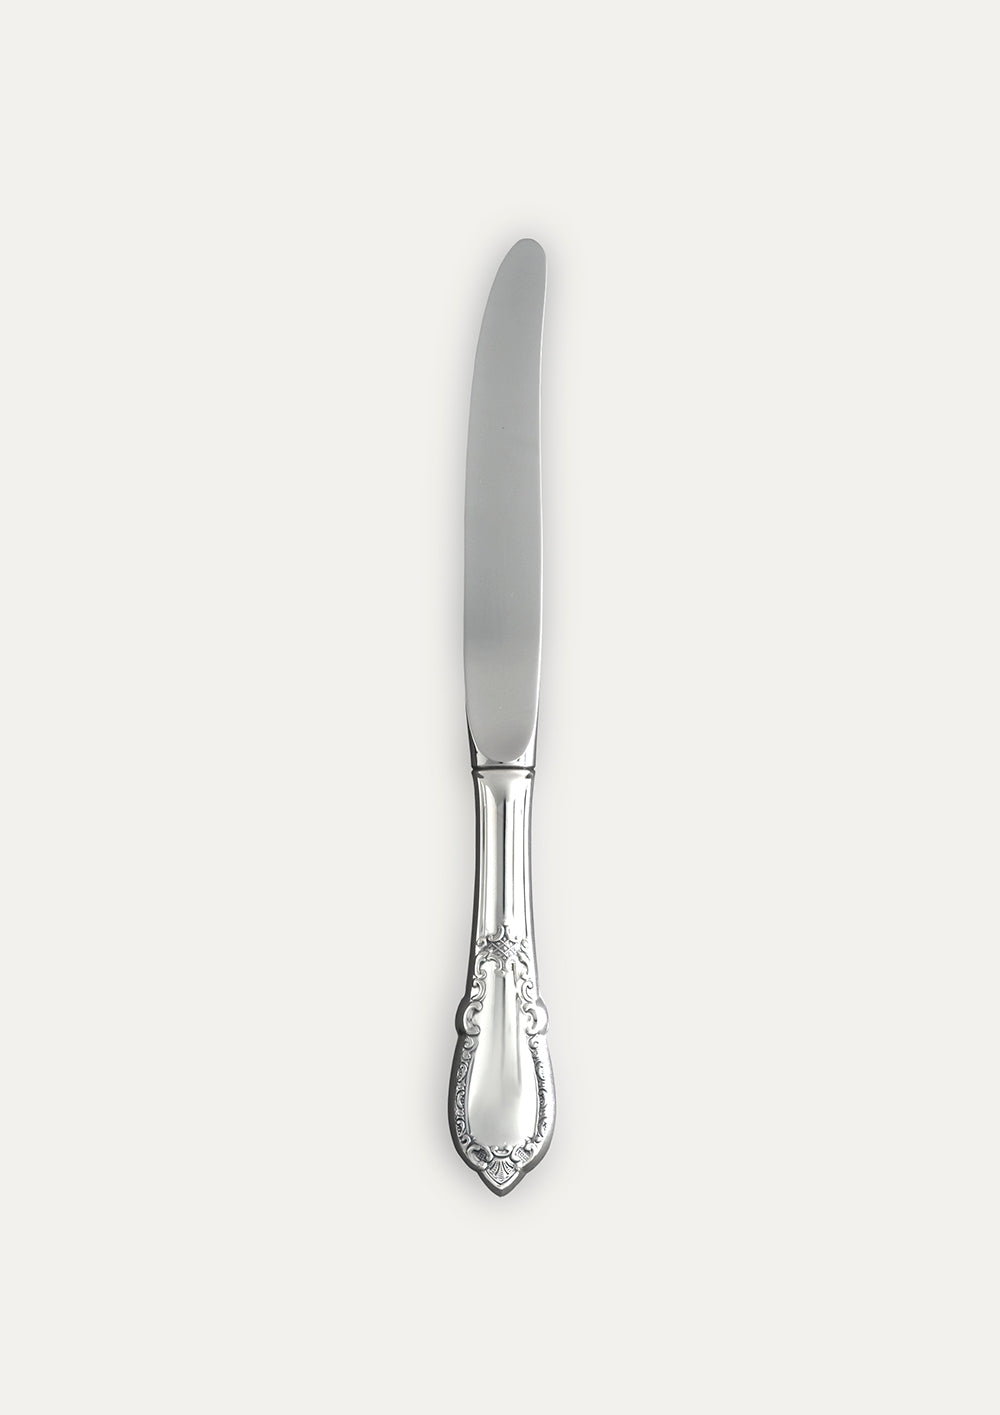 Noble small dining knife with a short handle